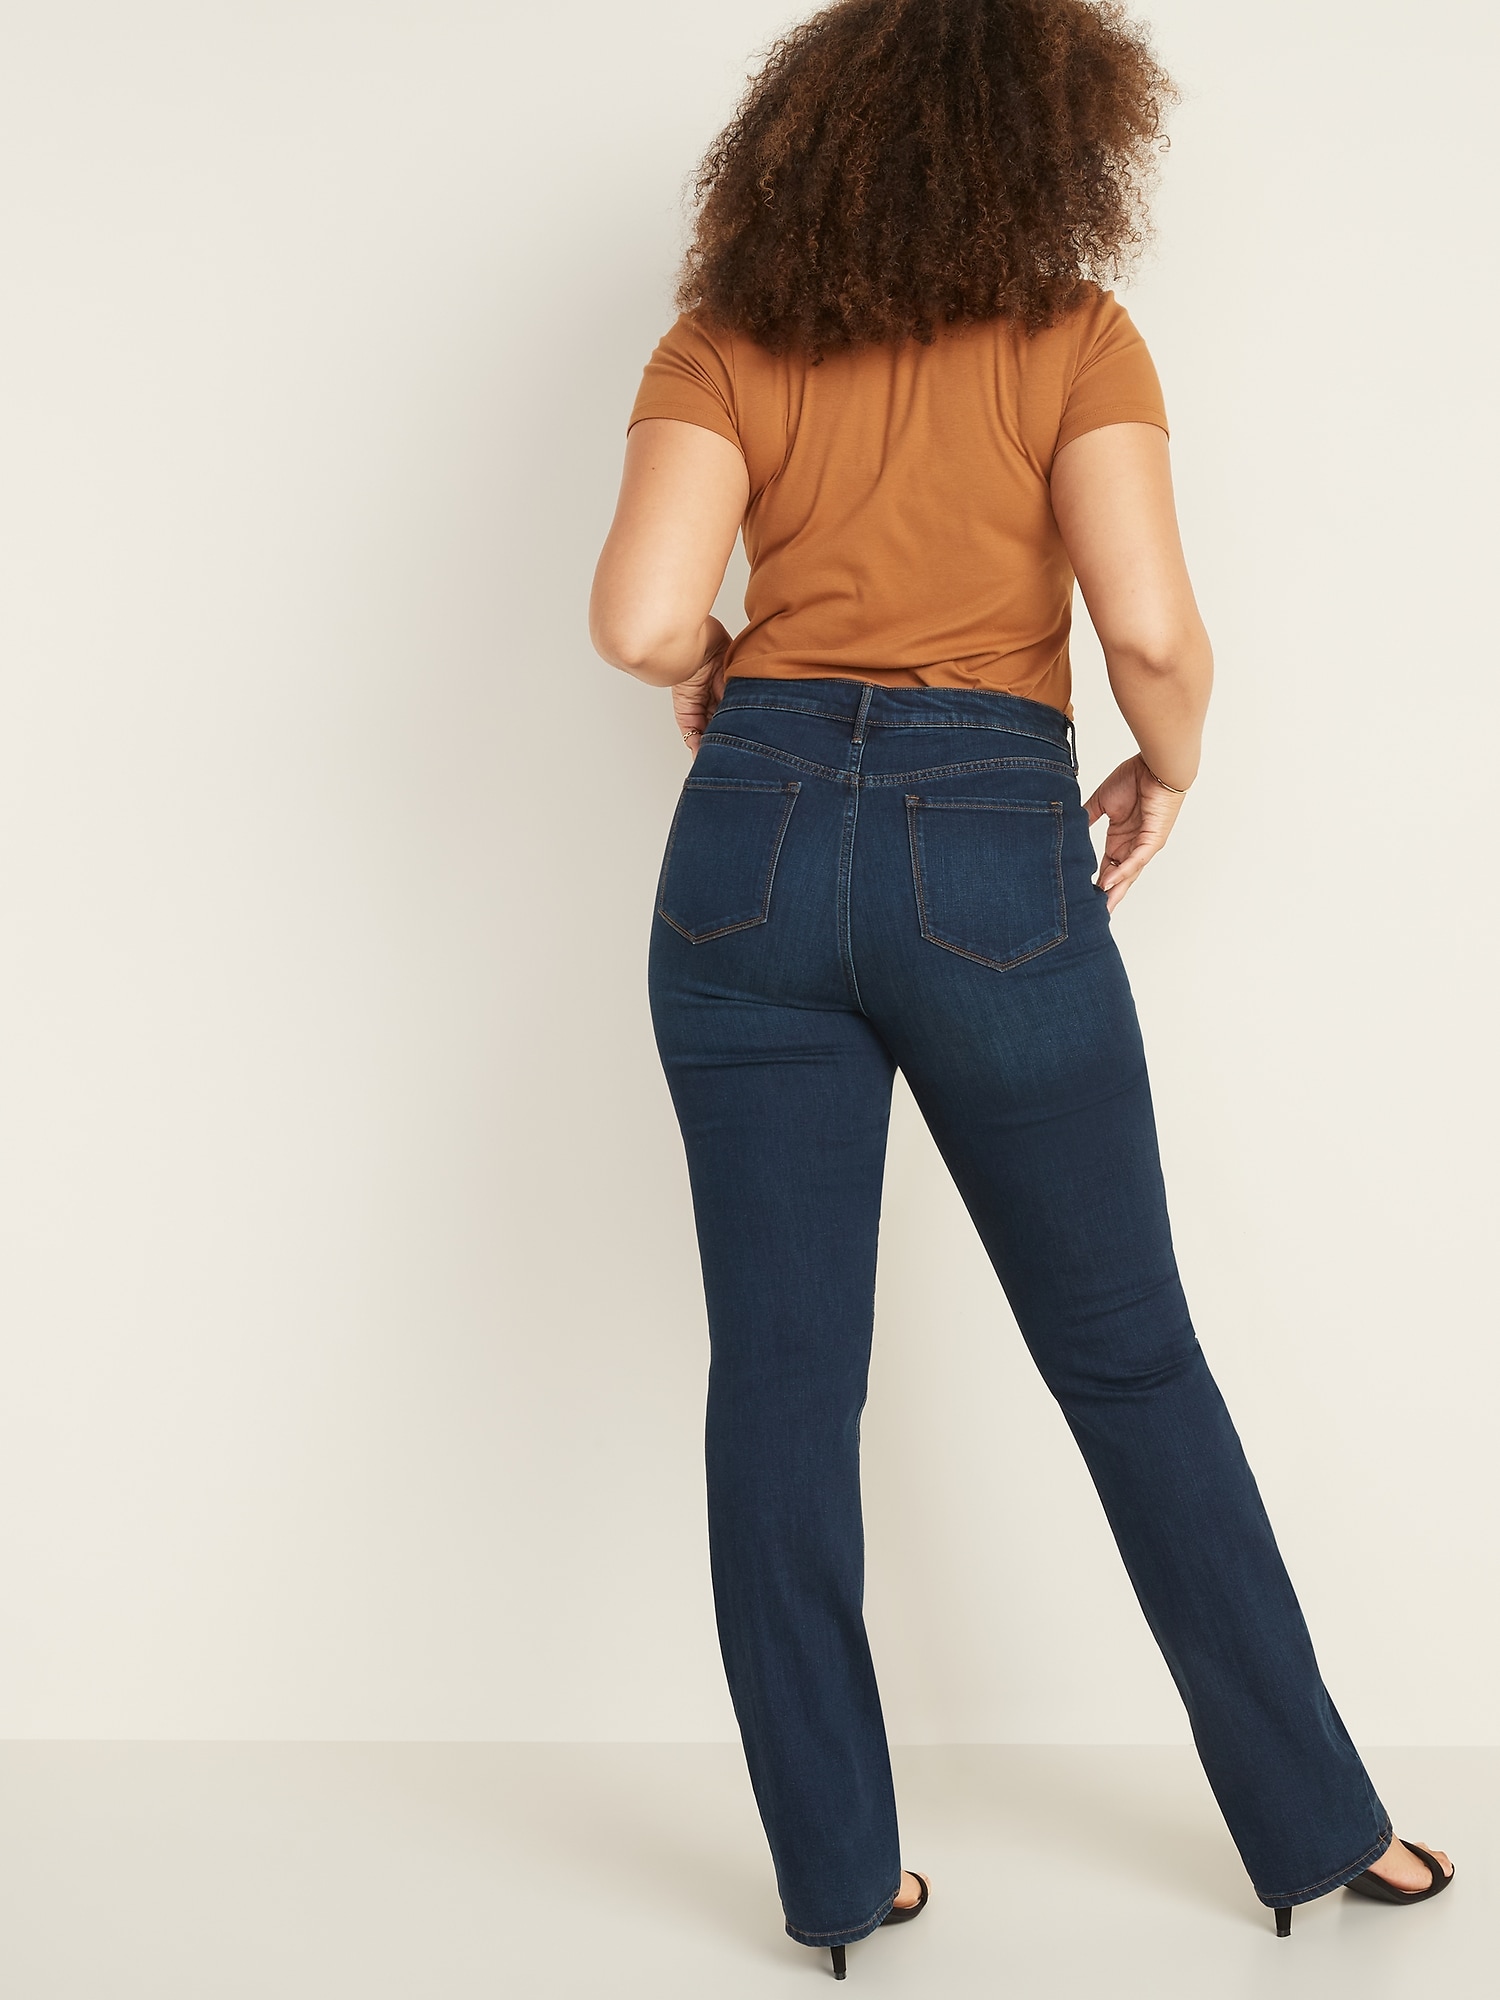 old navy original boot cut jeans